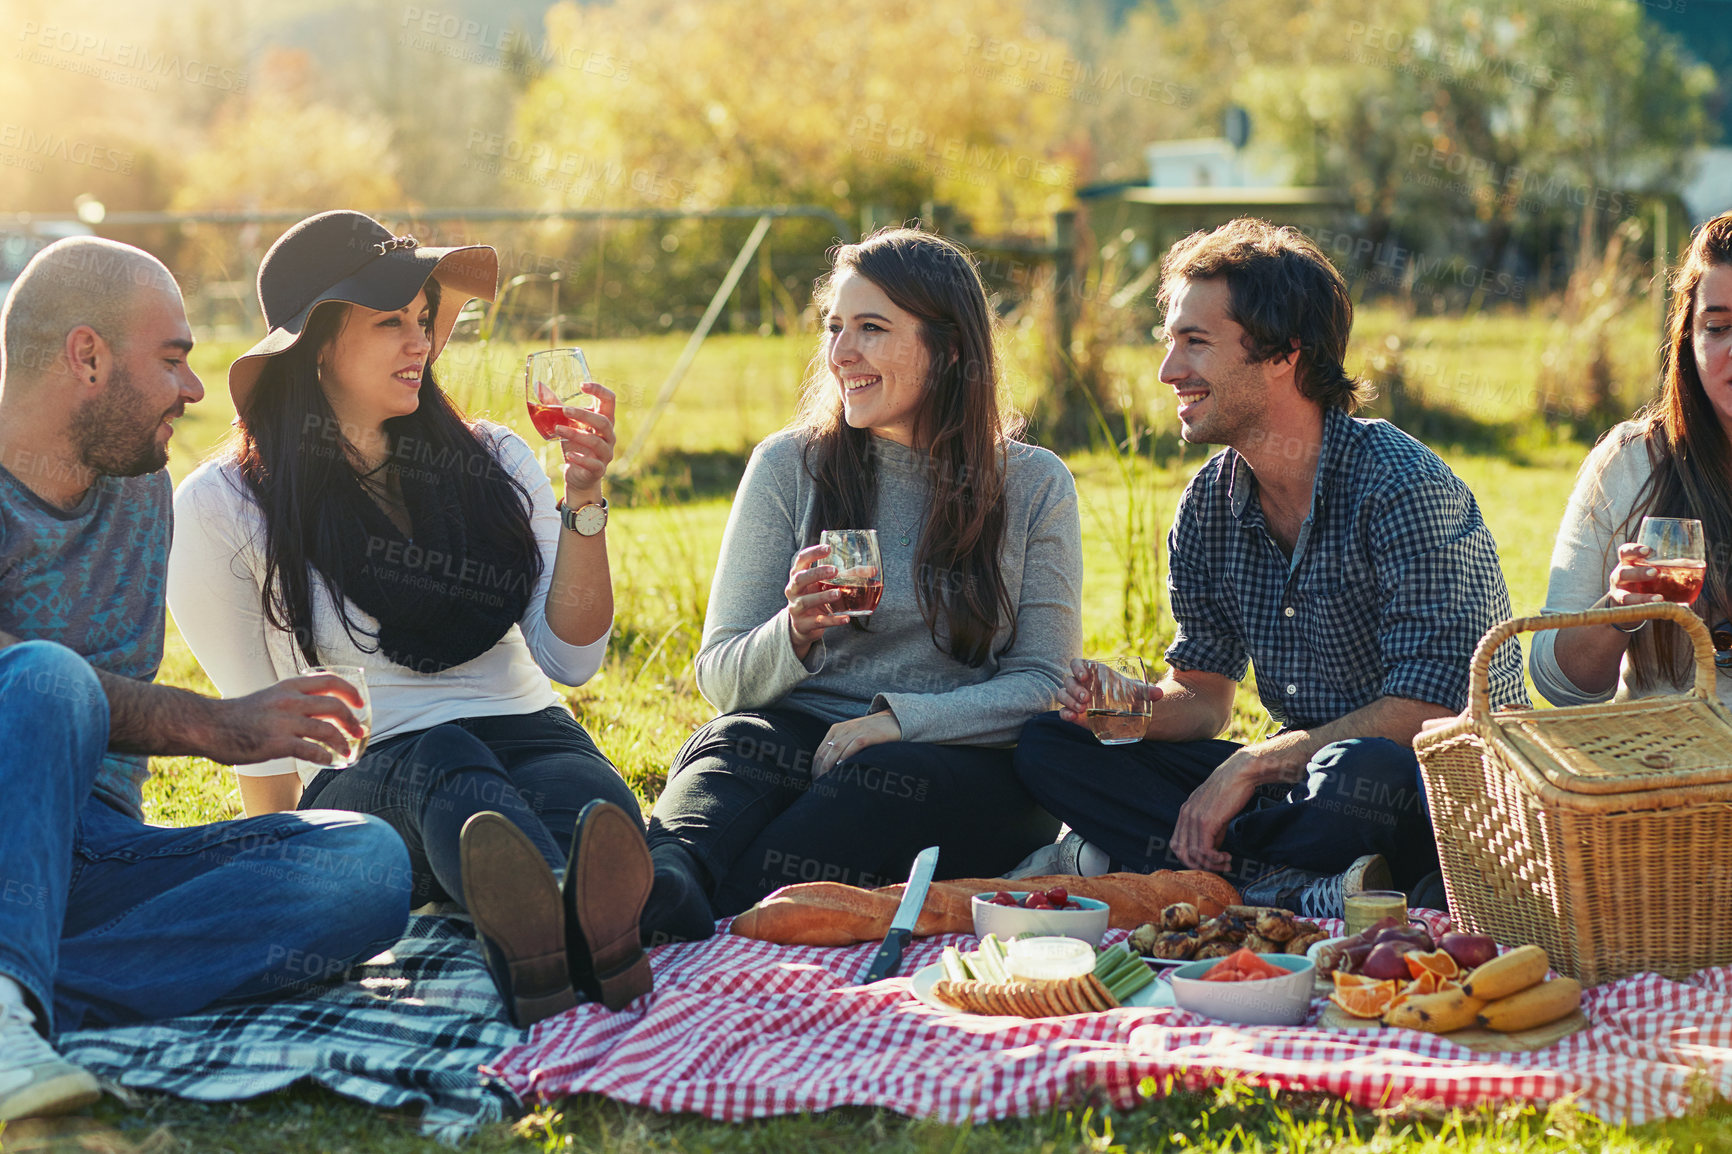 Buy stock photo Shot of a group of friends having a picnic together outdoors